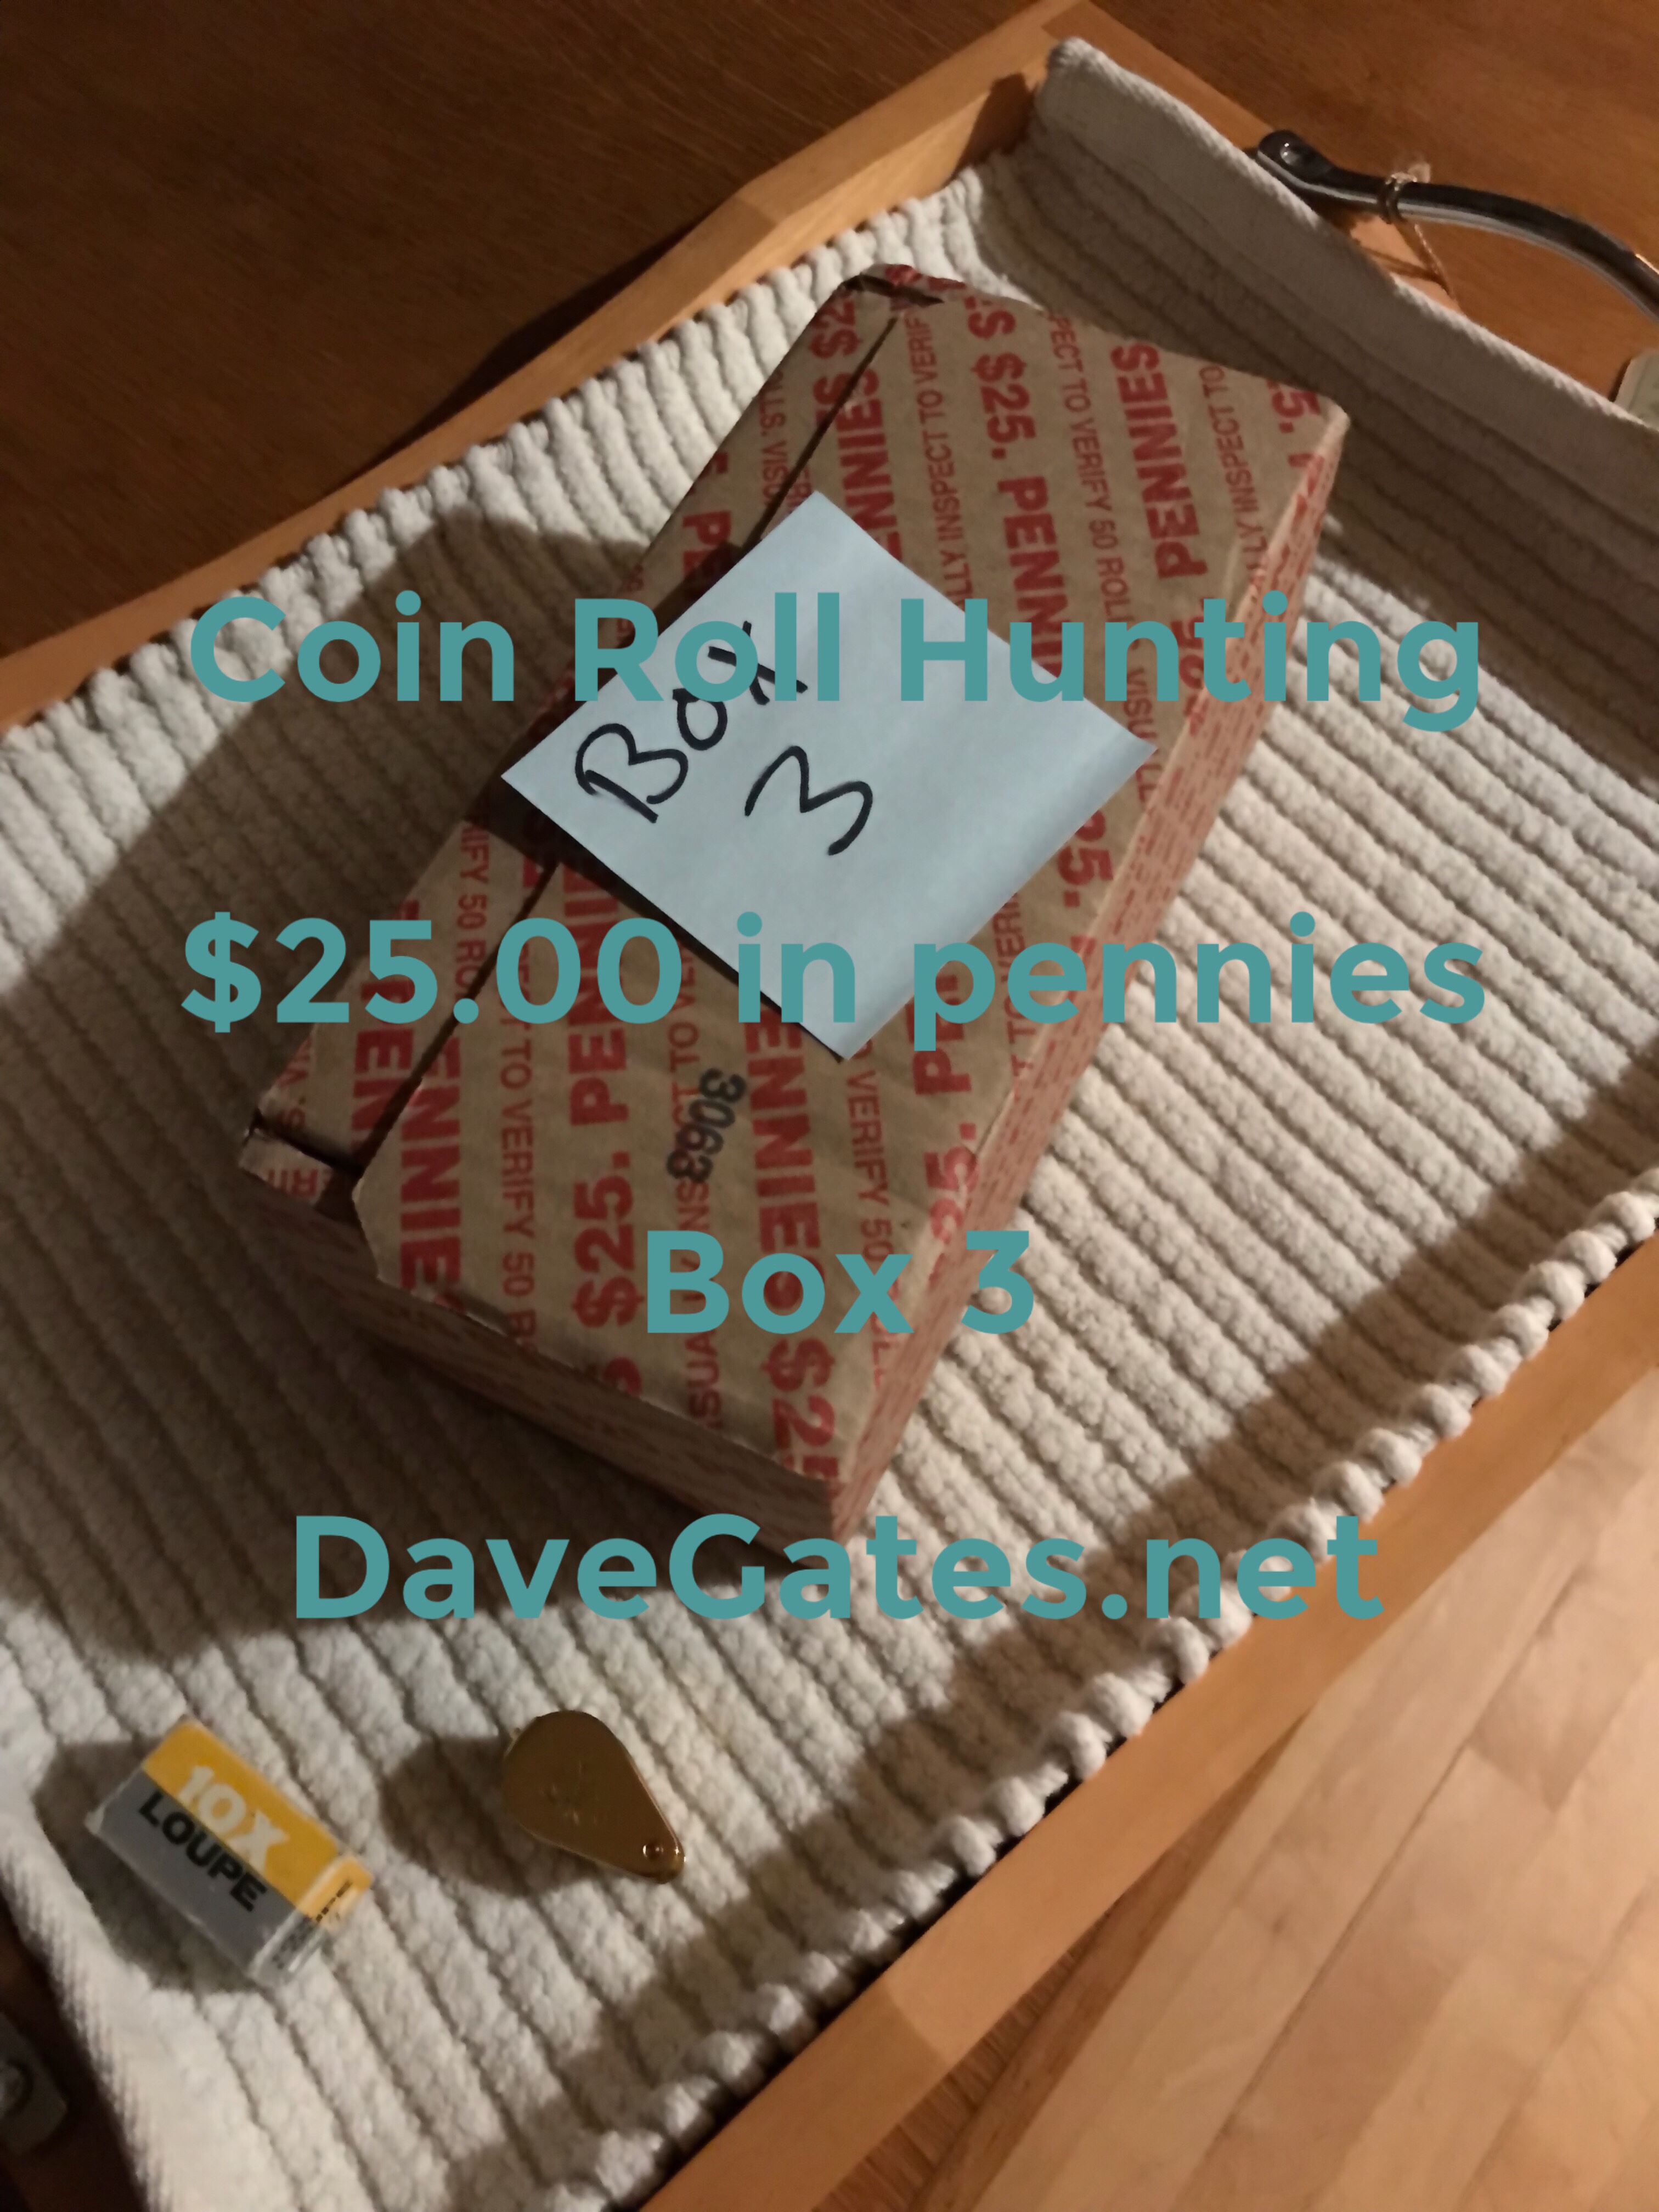 Coin Roll Hunting $25 in Pennies - Box 3